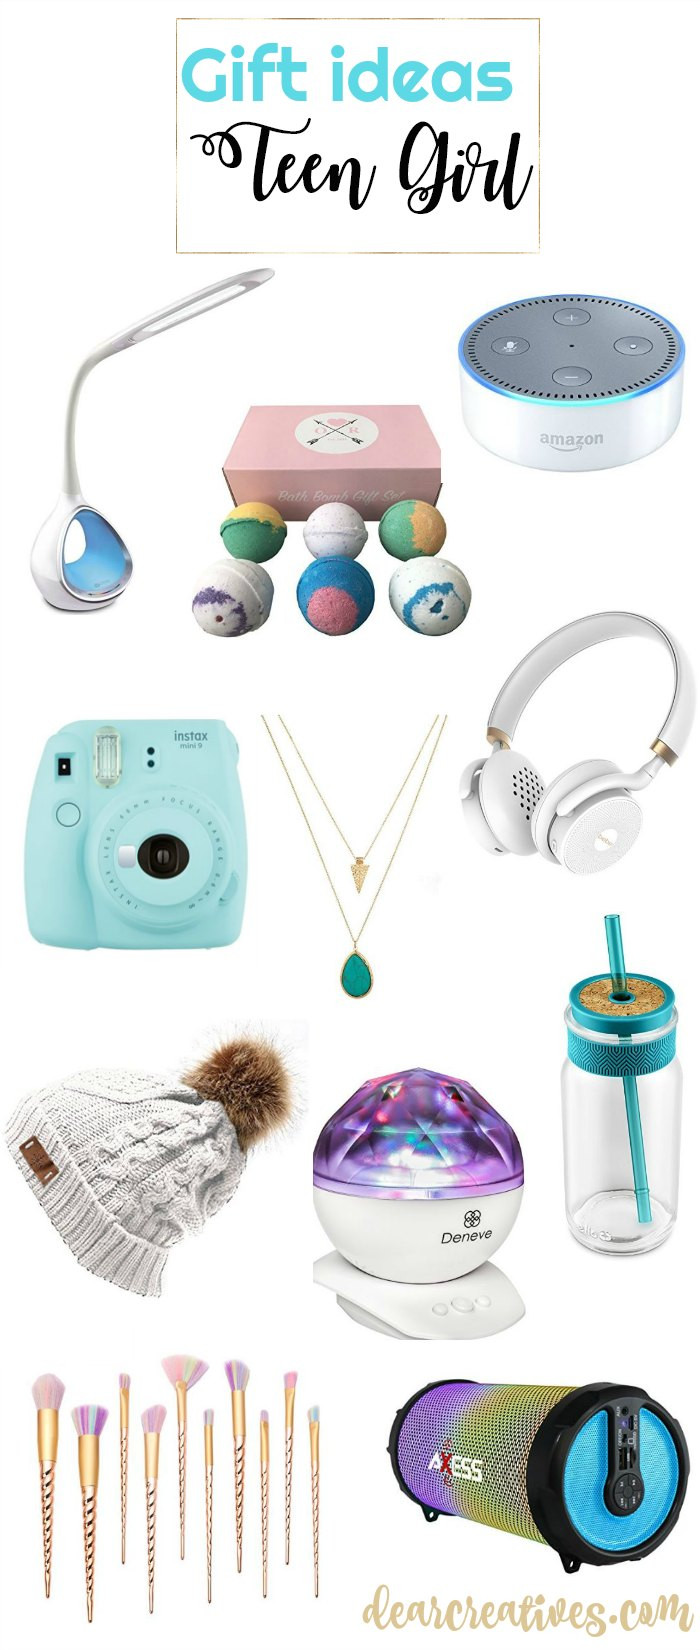 Amazing Gift Ideas For Girlfriend
 Gift Ideas for Teen Girls This Gift Guide Packed Full of